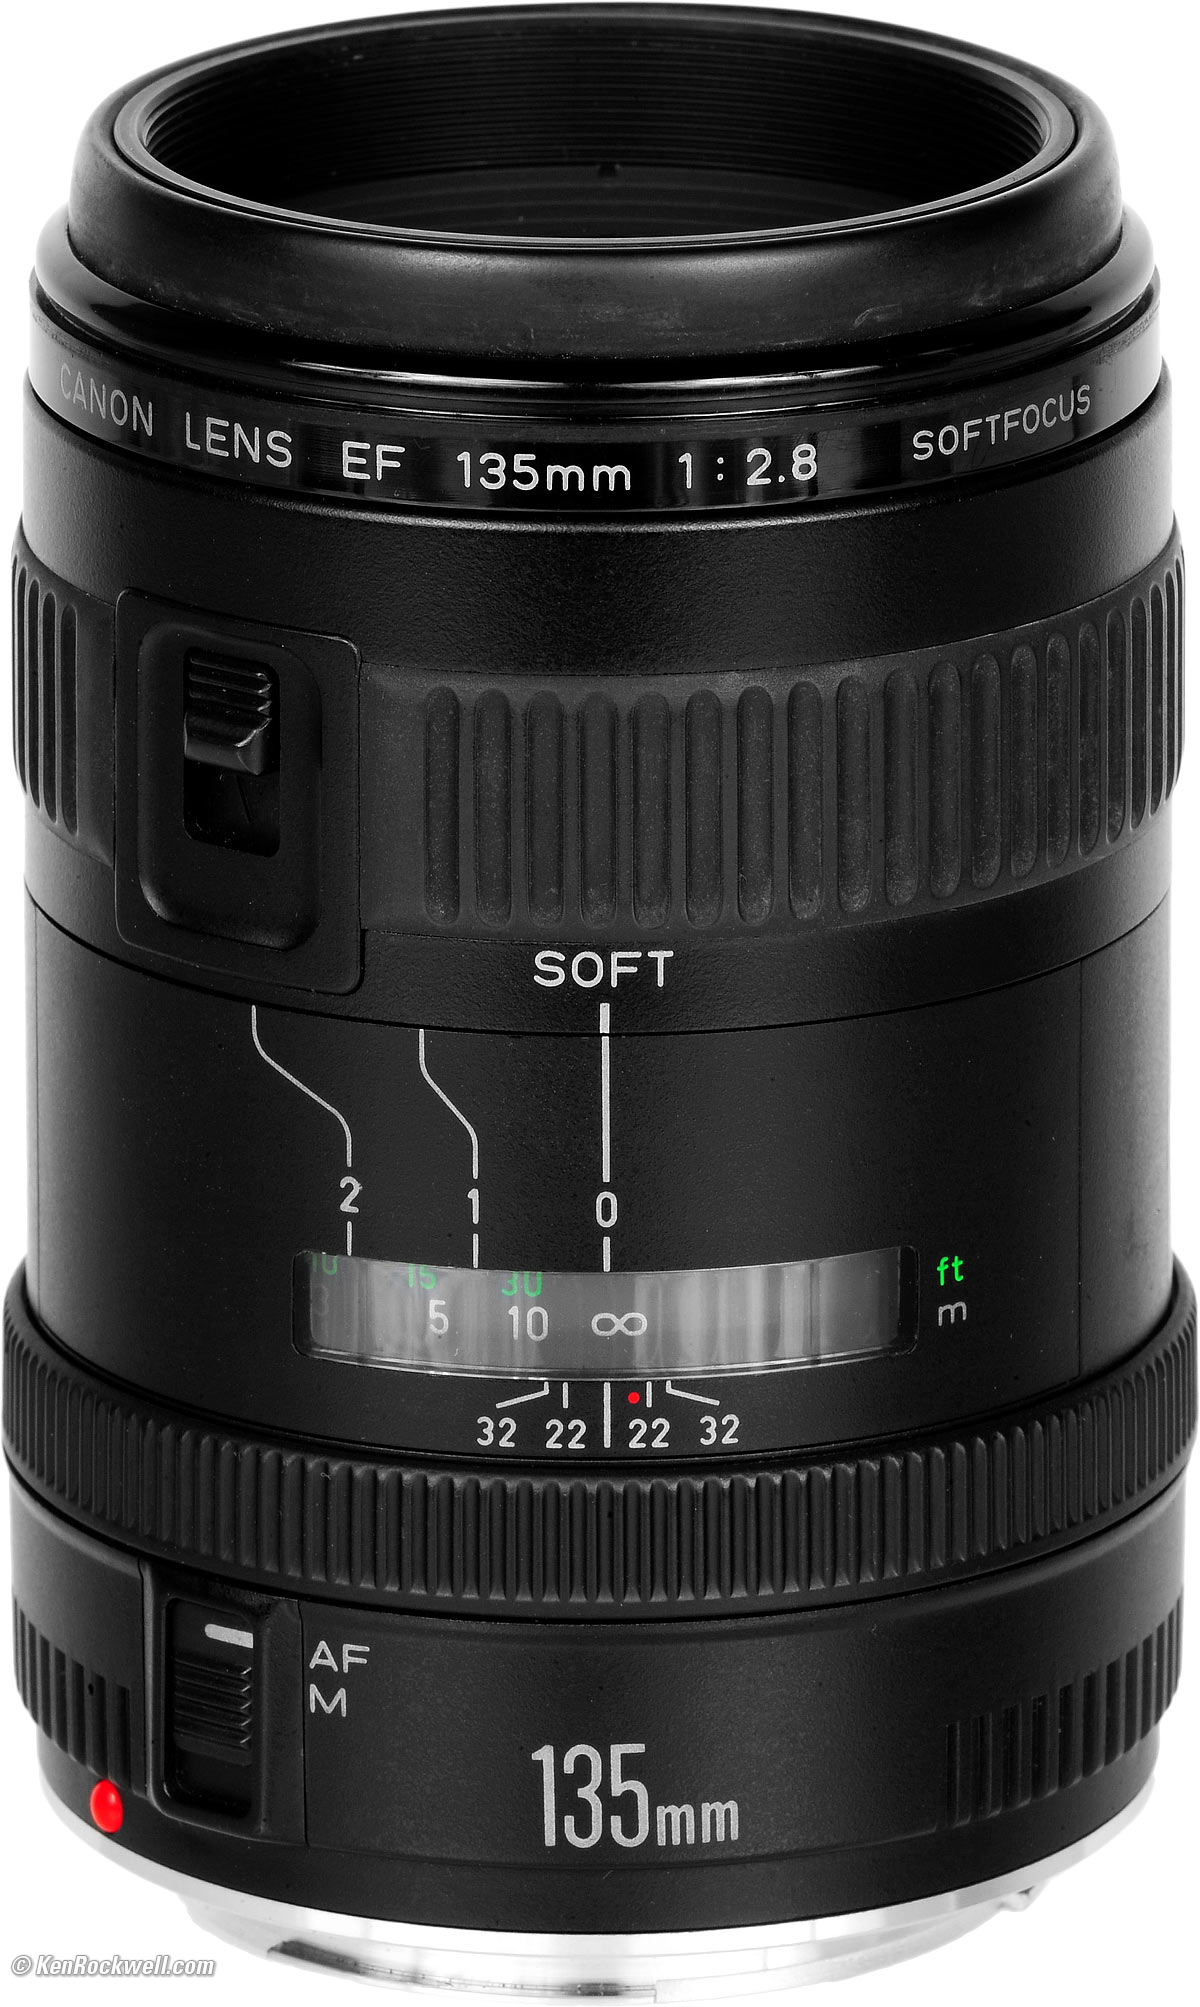 Canon EF 135mm f/2.8 Soft Focus Review